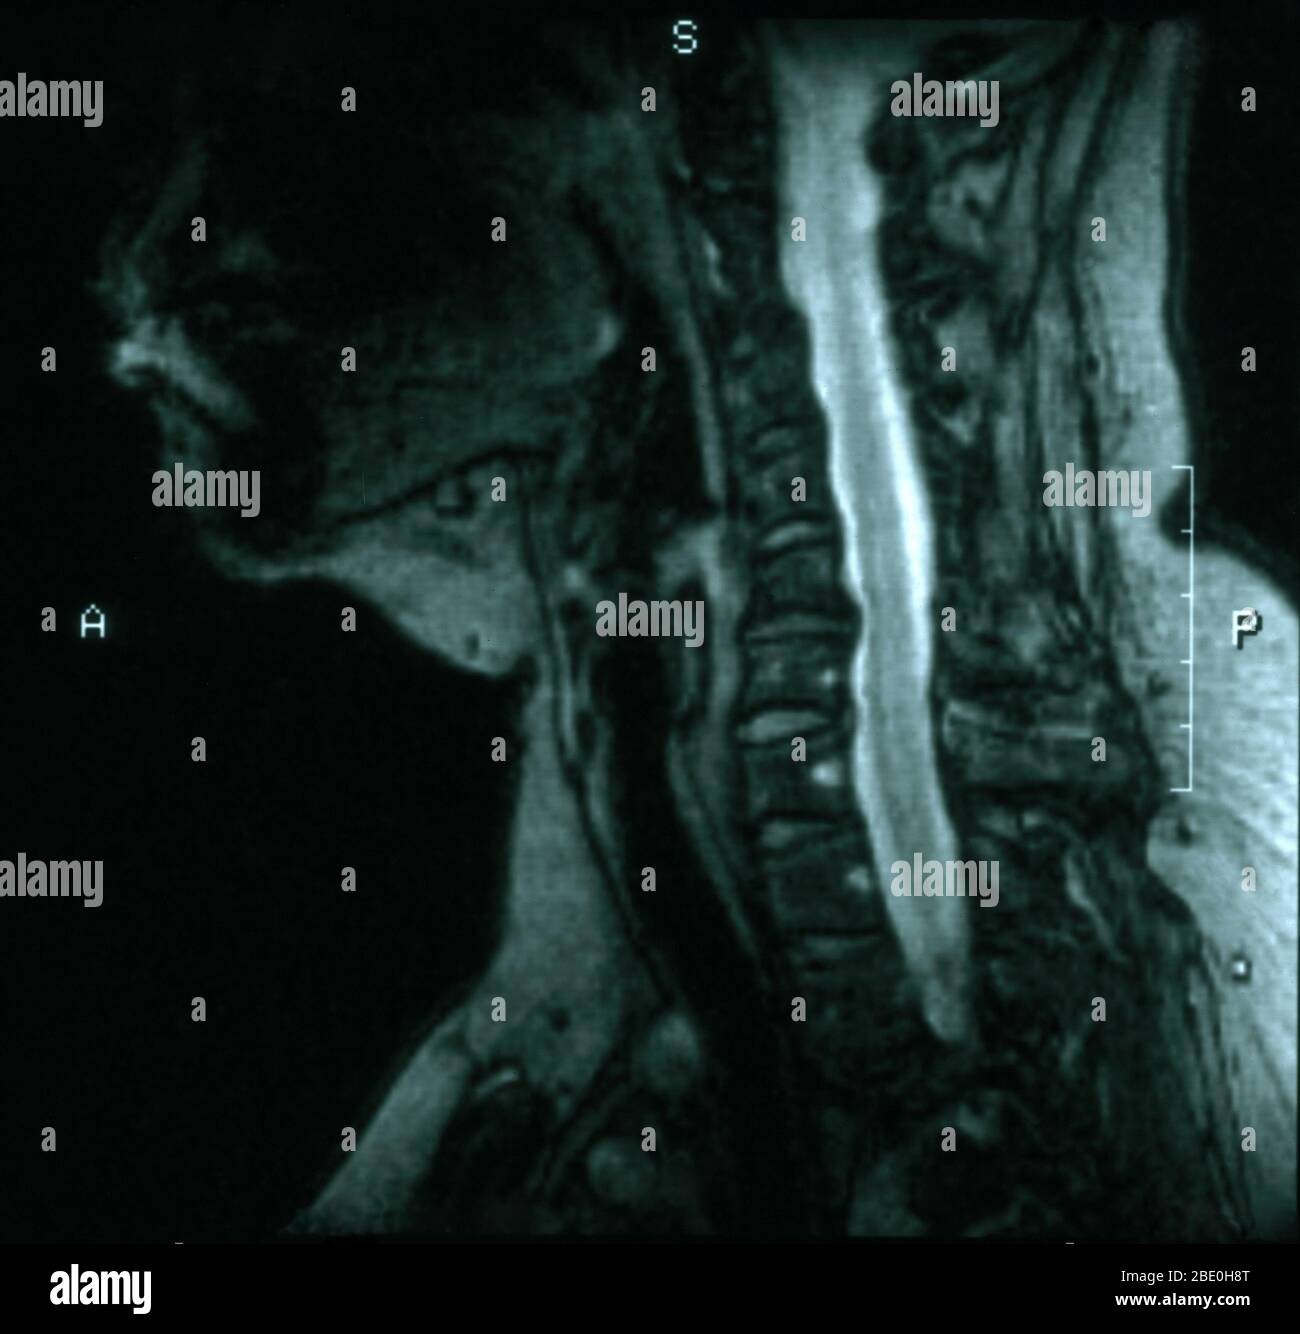 MRI of the cervical spine from the craniovertebral junction down T3-T4 level. MRI slice thickness is 5.0MM. The MRI shows degenerative disc disease at C5-6 and C6-7 with posterior osteophytes at both levels causing a slight narrowing of the spinal canal particularly at C5-6. Stock Photo